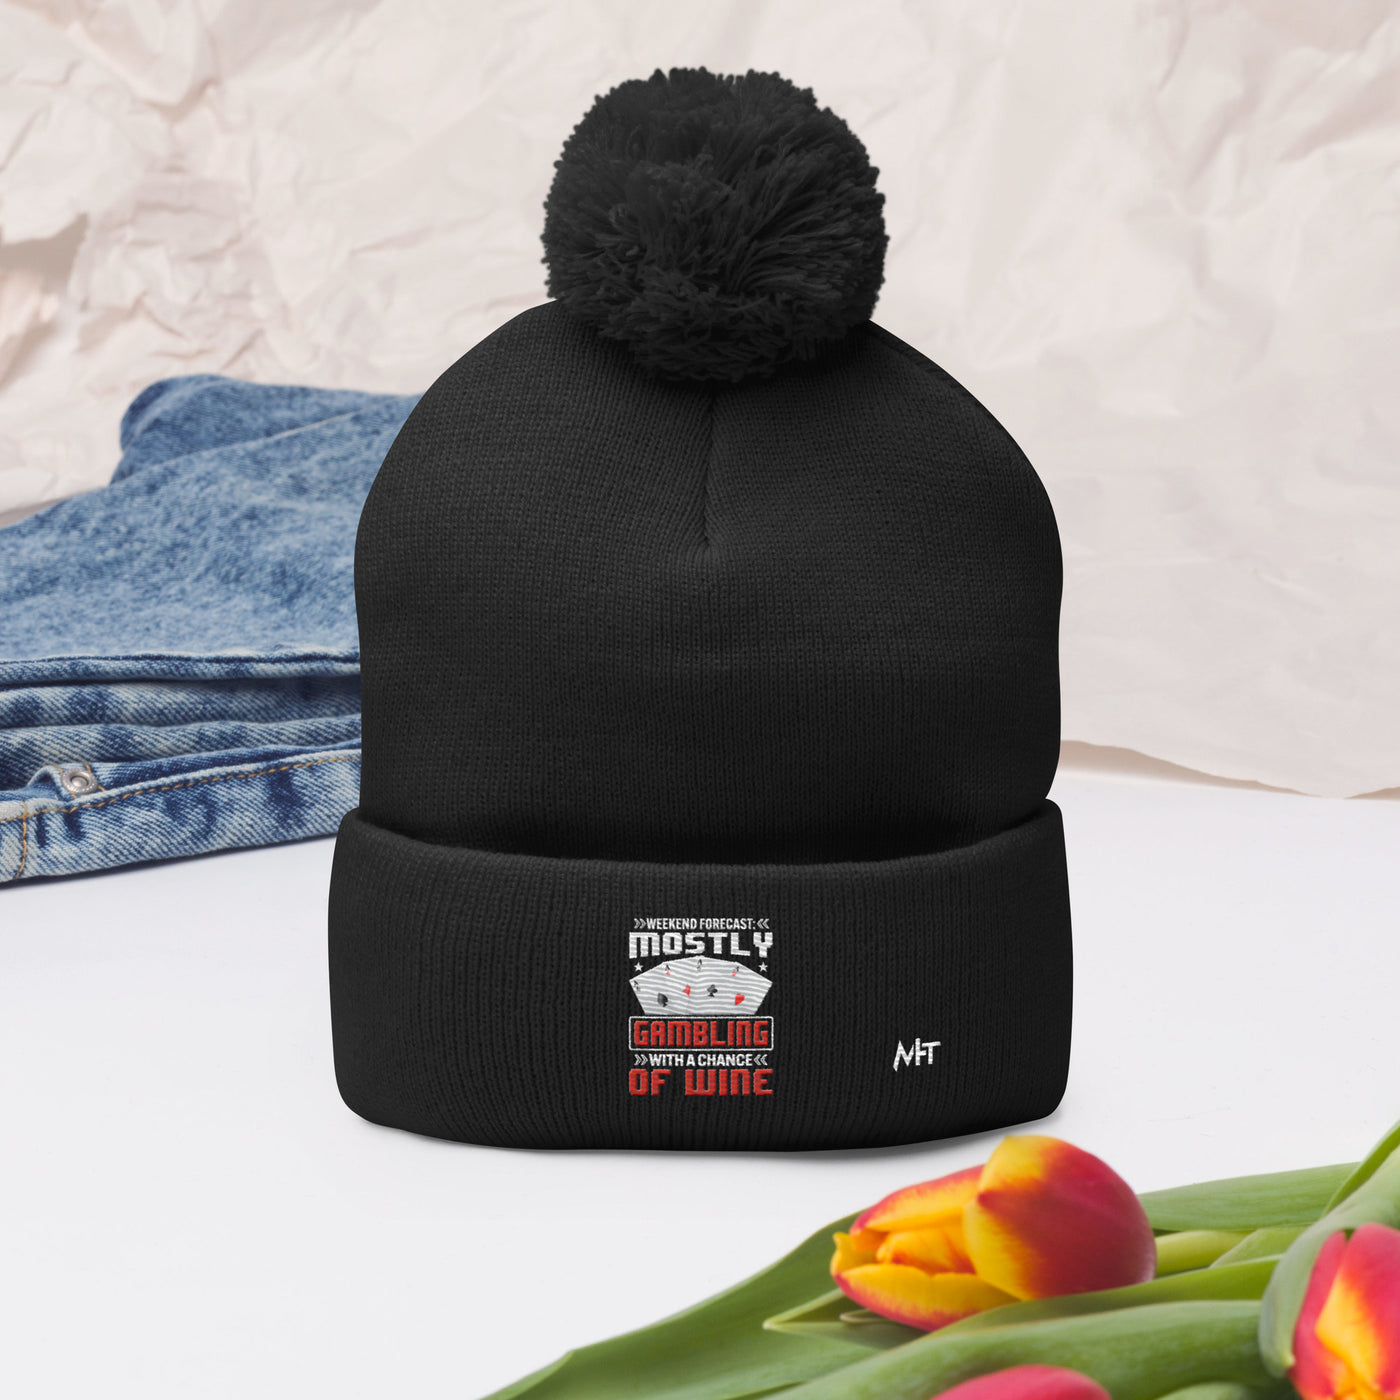 Weekend Forecast Mostly Gambling With a Chance of Wine - Pom-Pom Beanie